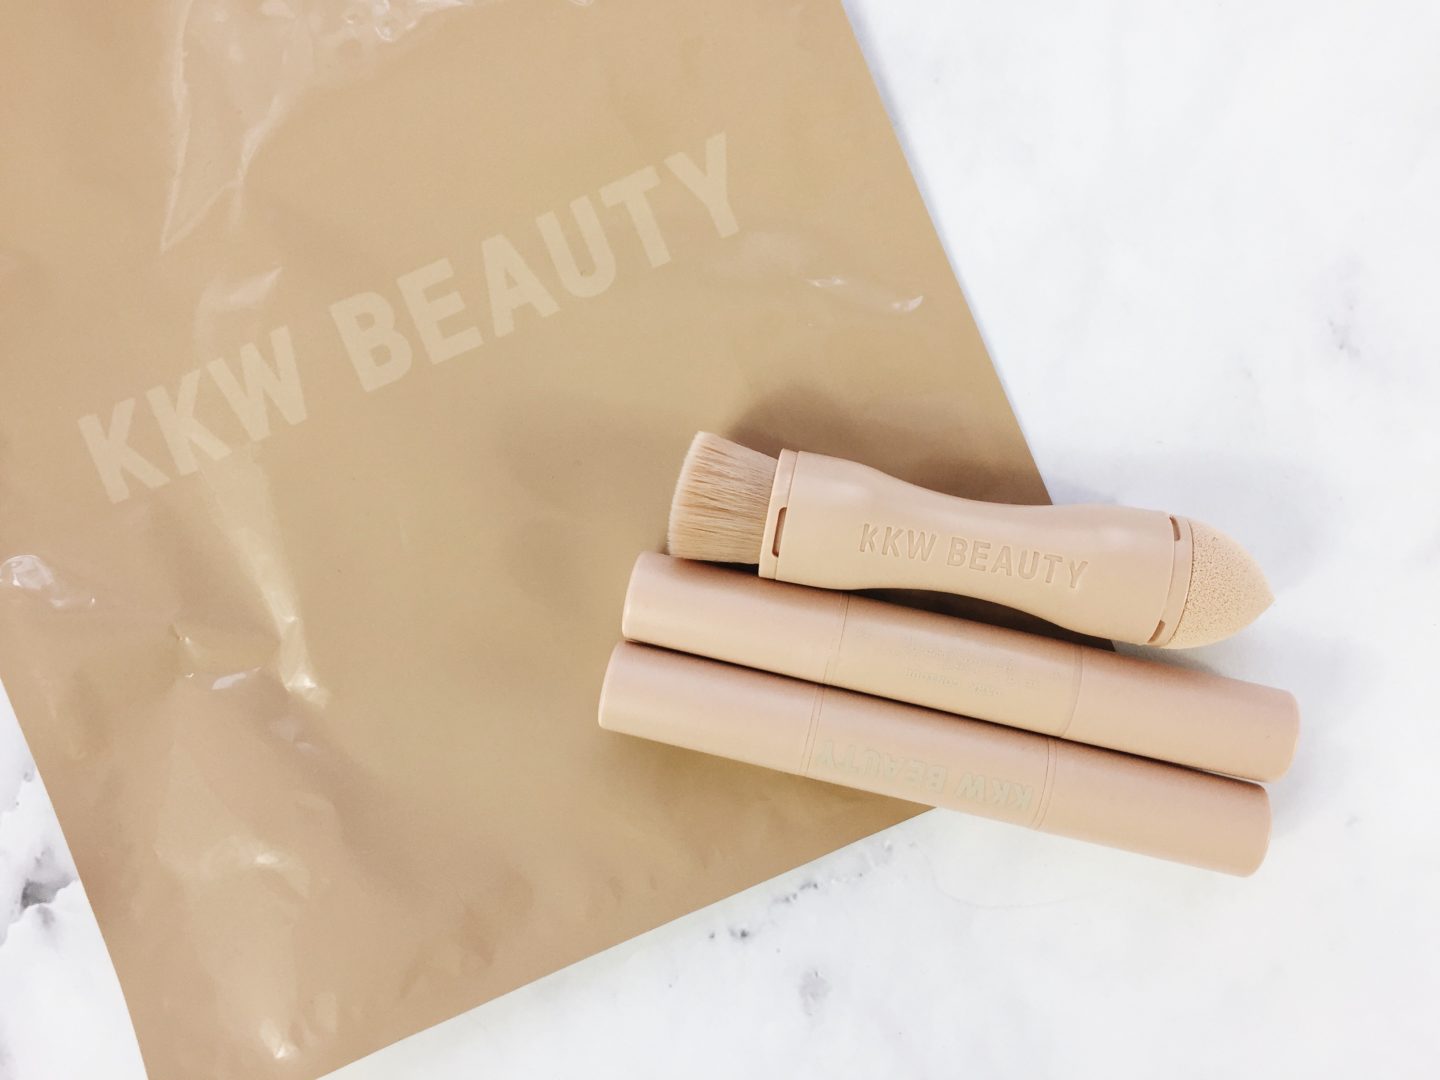 KKW Beauty Contour Stick: Review + Swatches